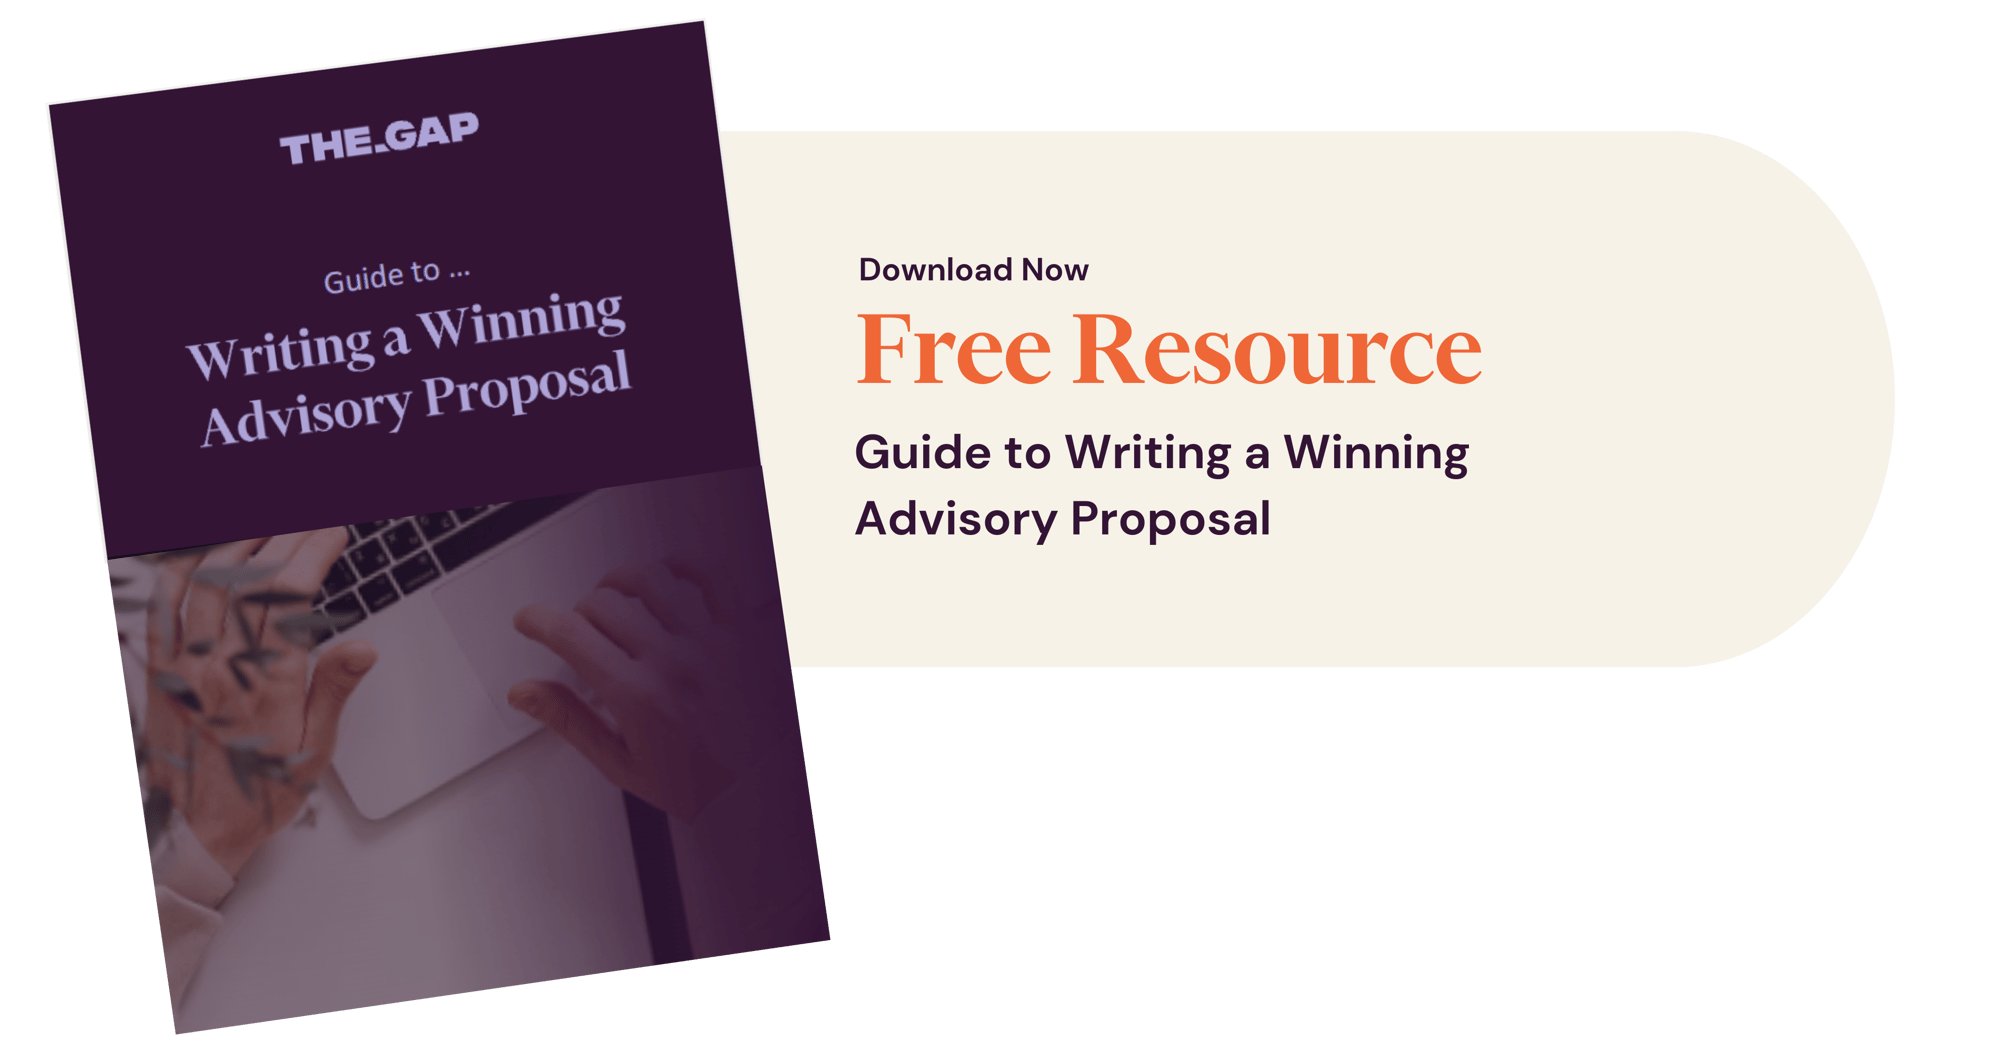 Download Banner - guide to writing a winning advisory proposal (1)